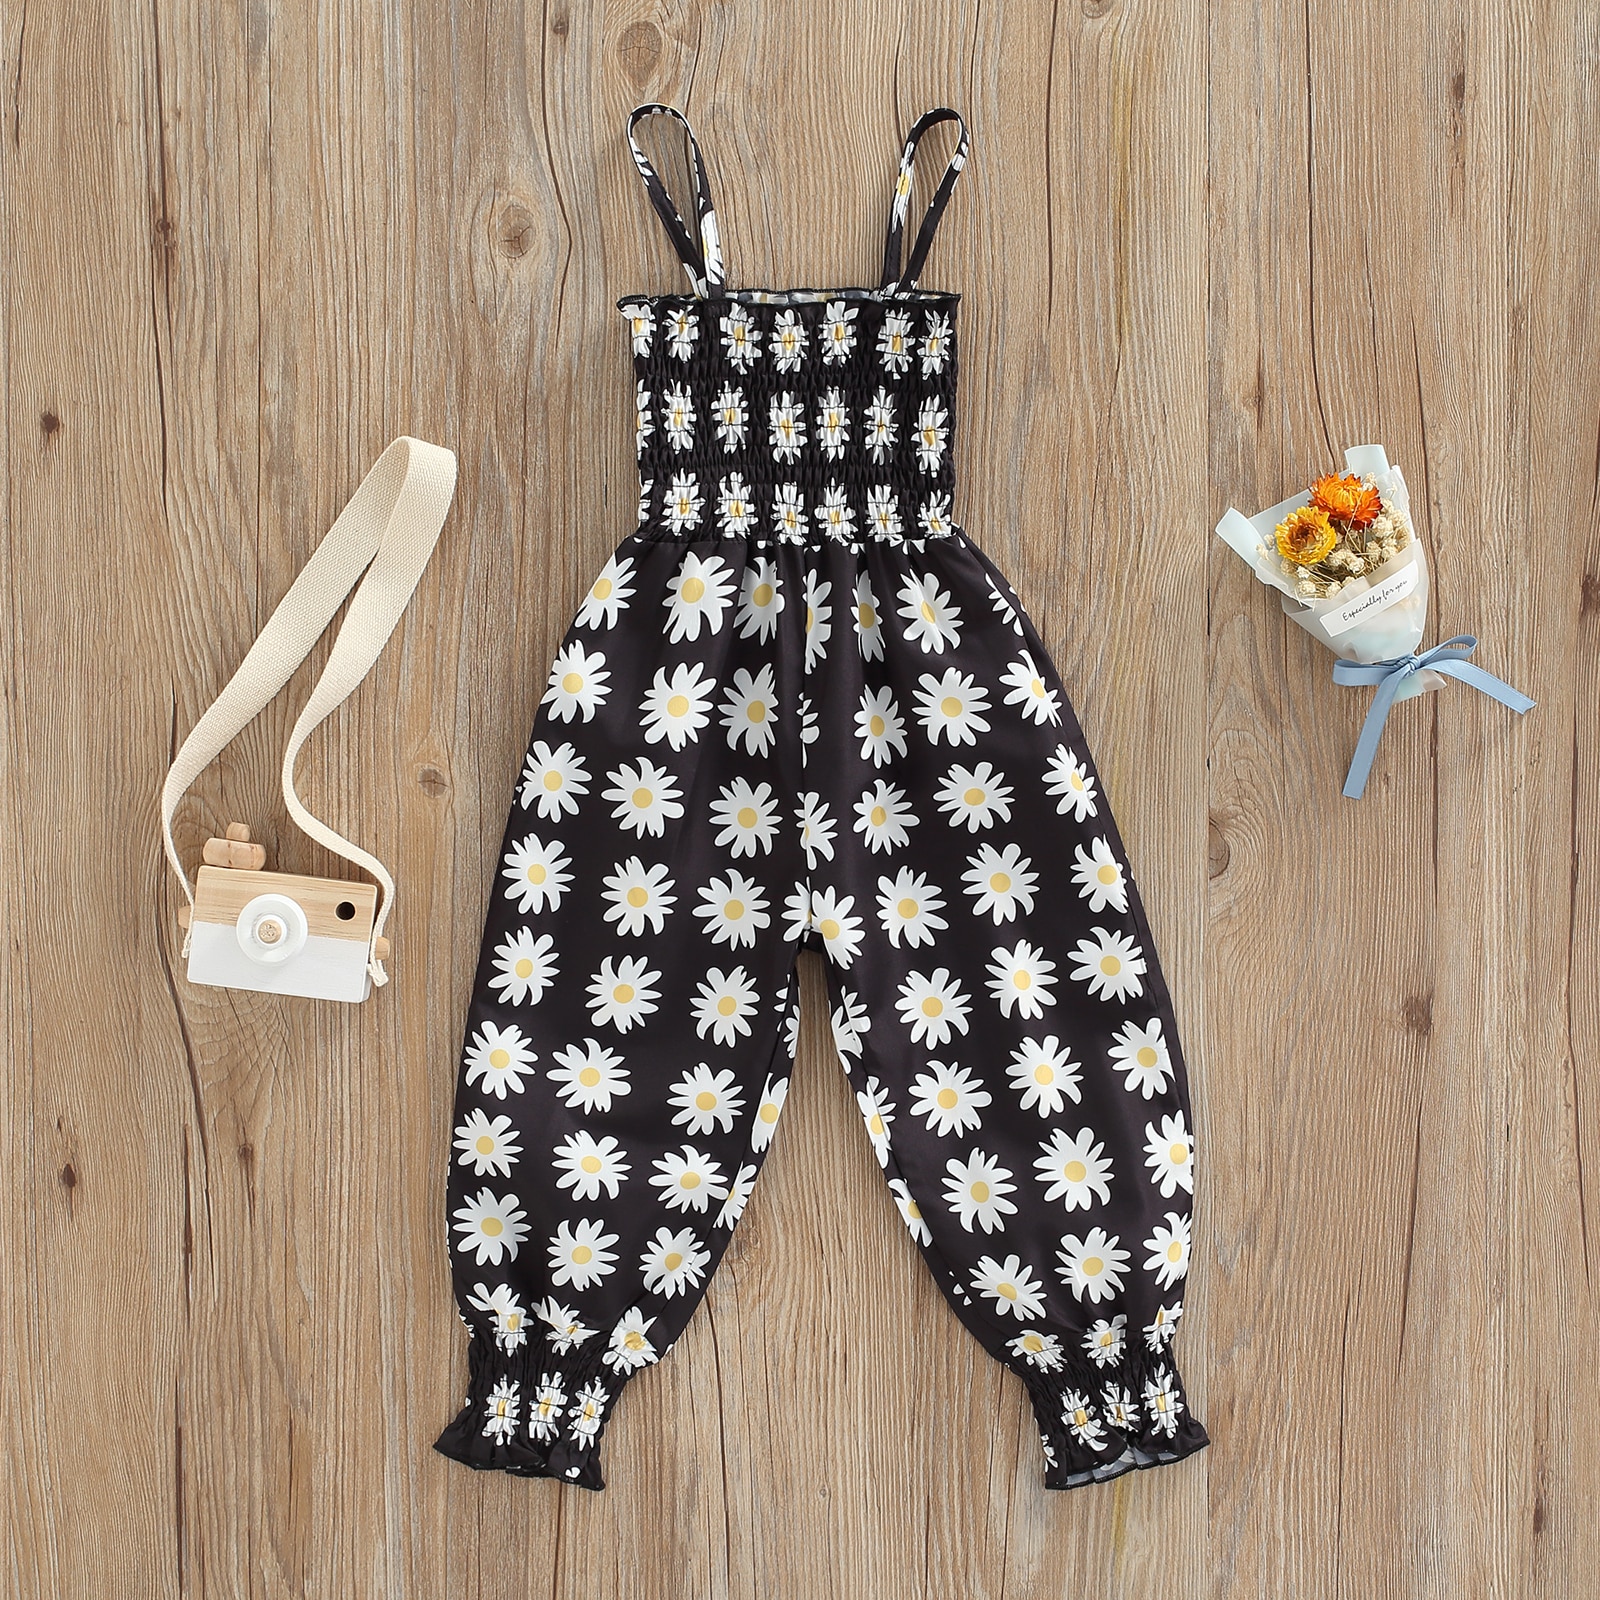 Kids-Summer-Jumpsuits-Daisy-Print-Elastic-Tied-Up-Strappy-Sleeveless-Siamese-Trousers-for-Baby-Girls-9-1